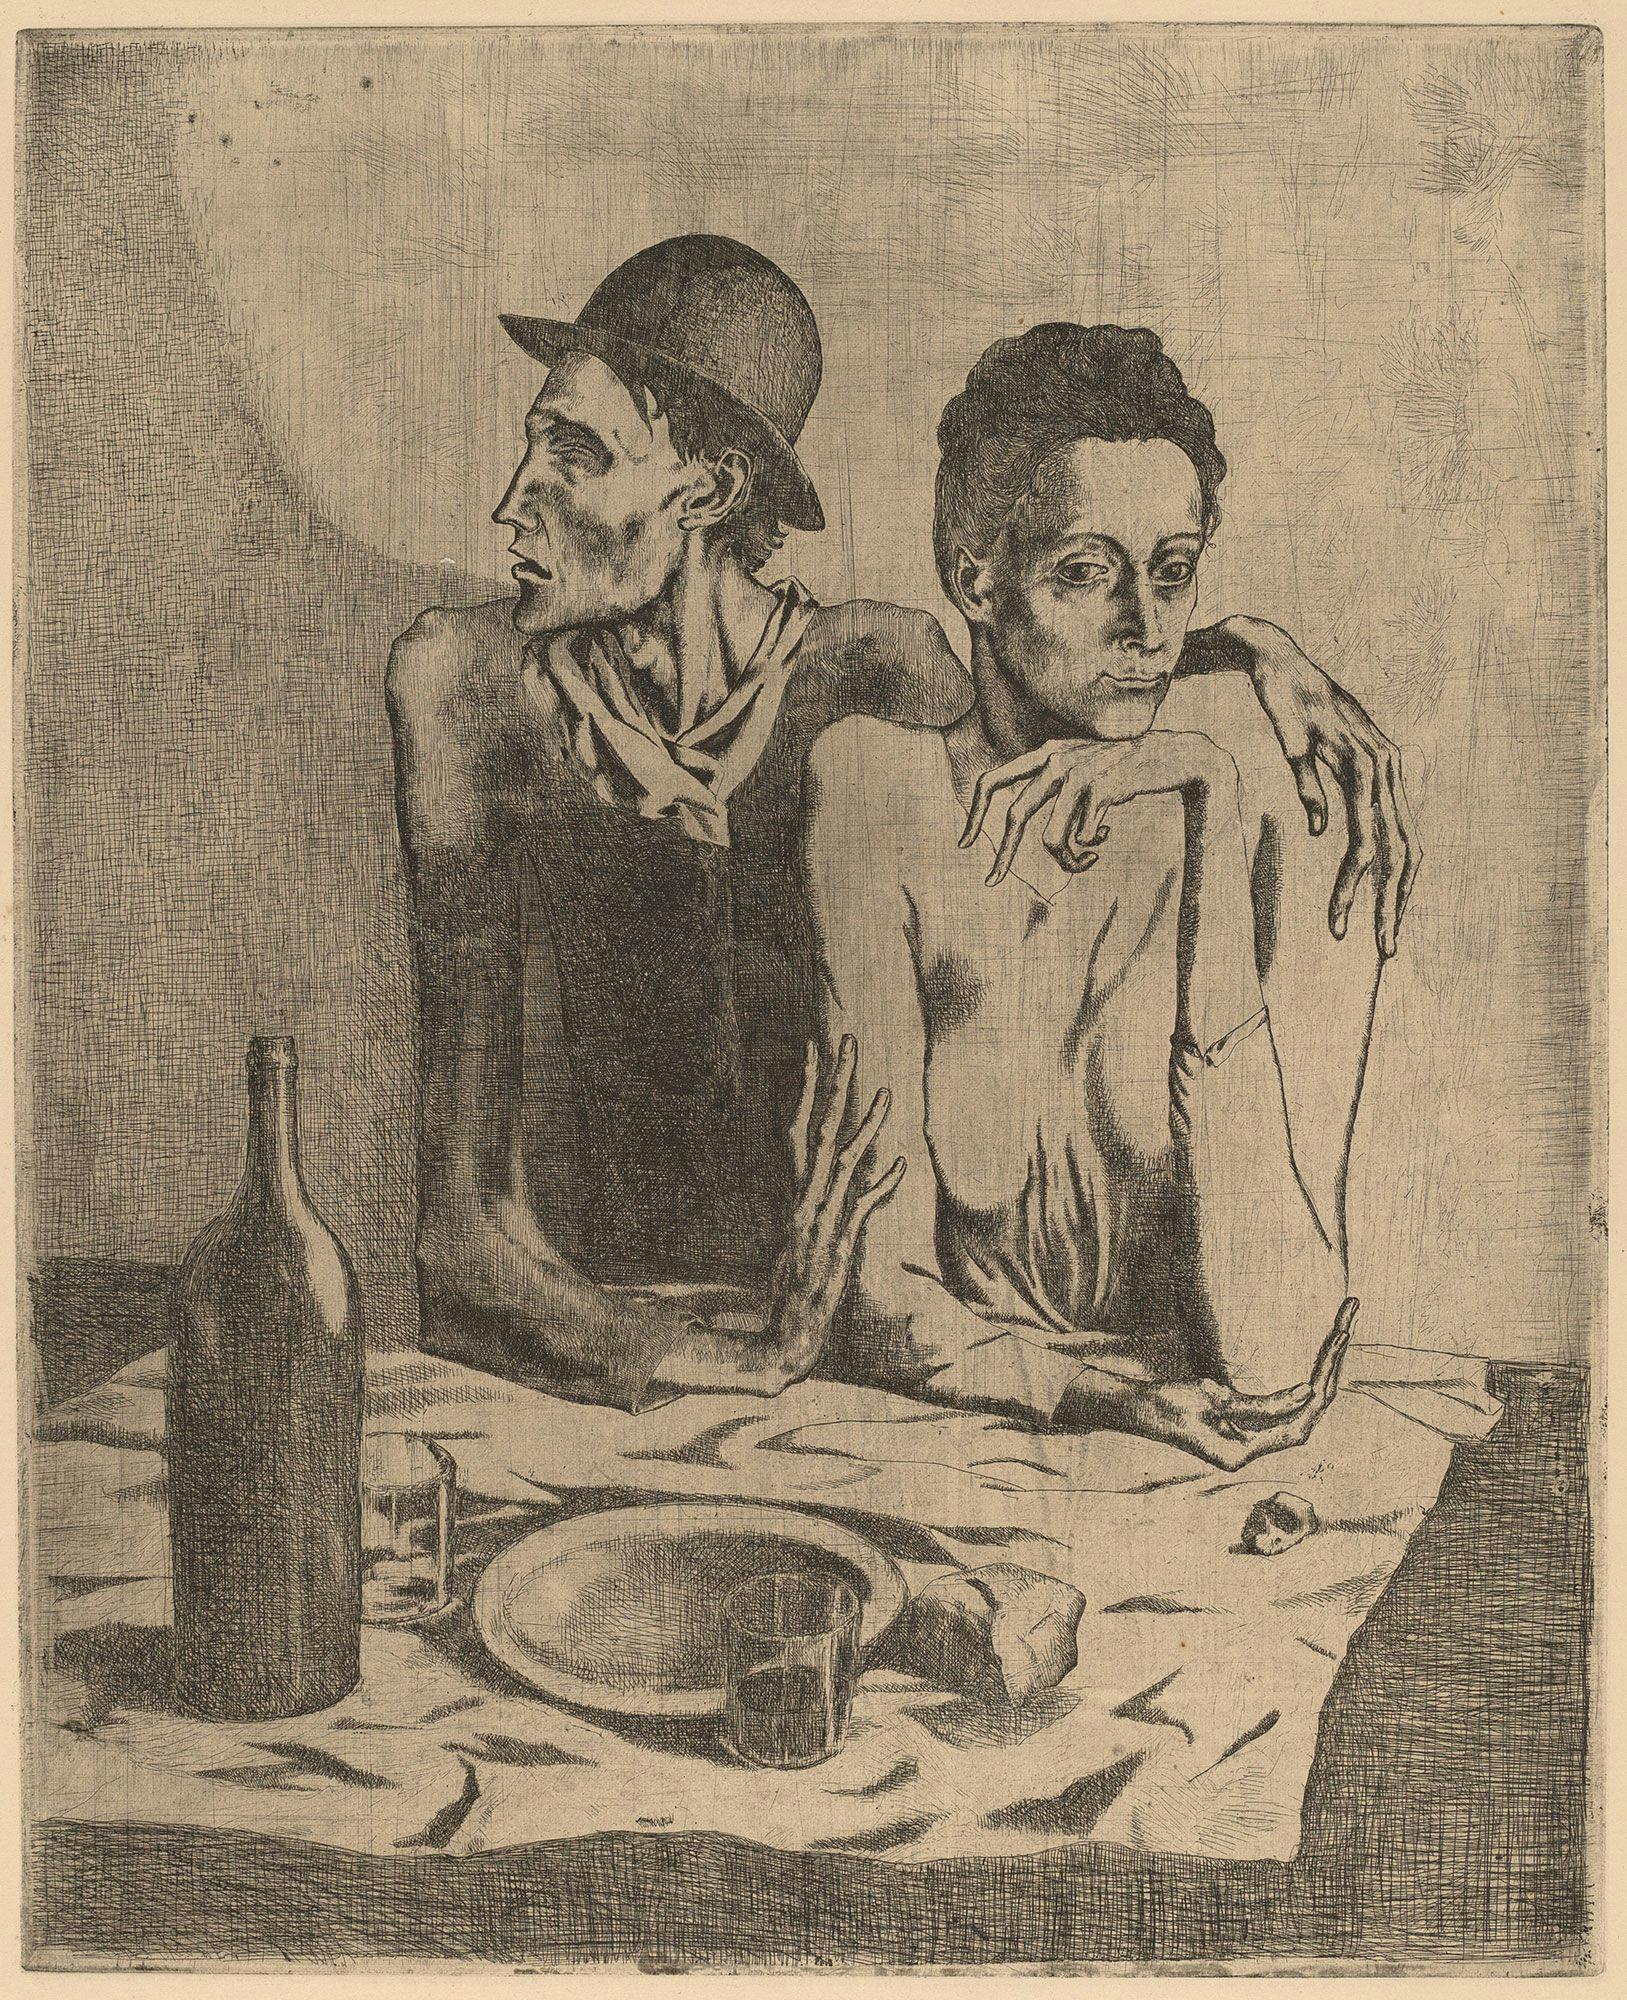 Pablo Picasso The Frugal Repast (Le repas frugal) Gift of Mr. and Mrs. Burton Tremaine 1971.87.13